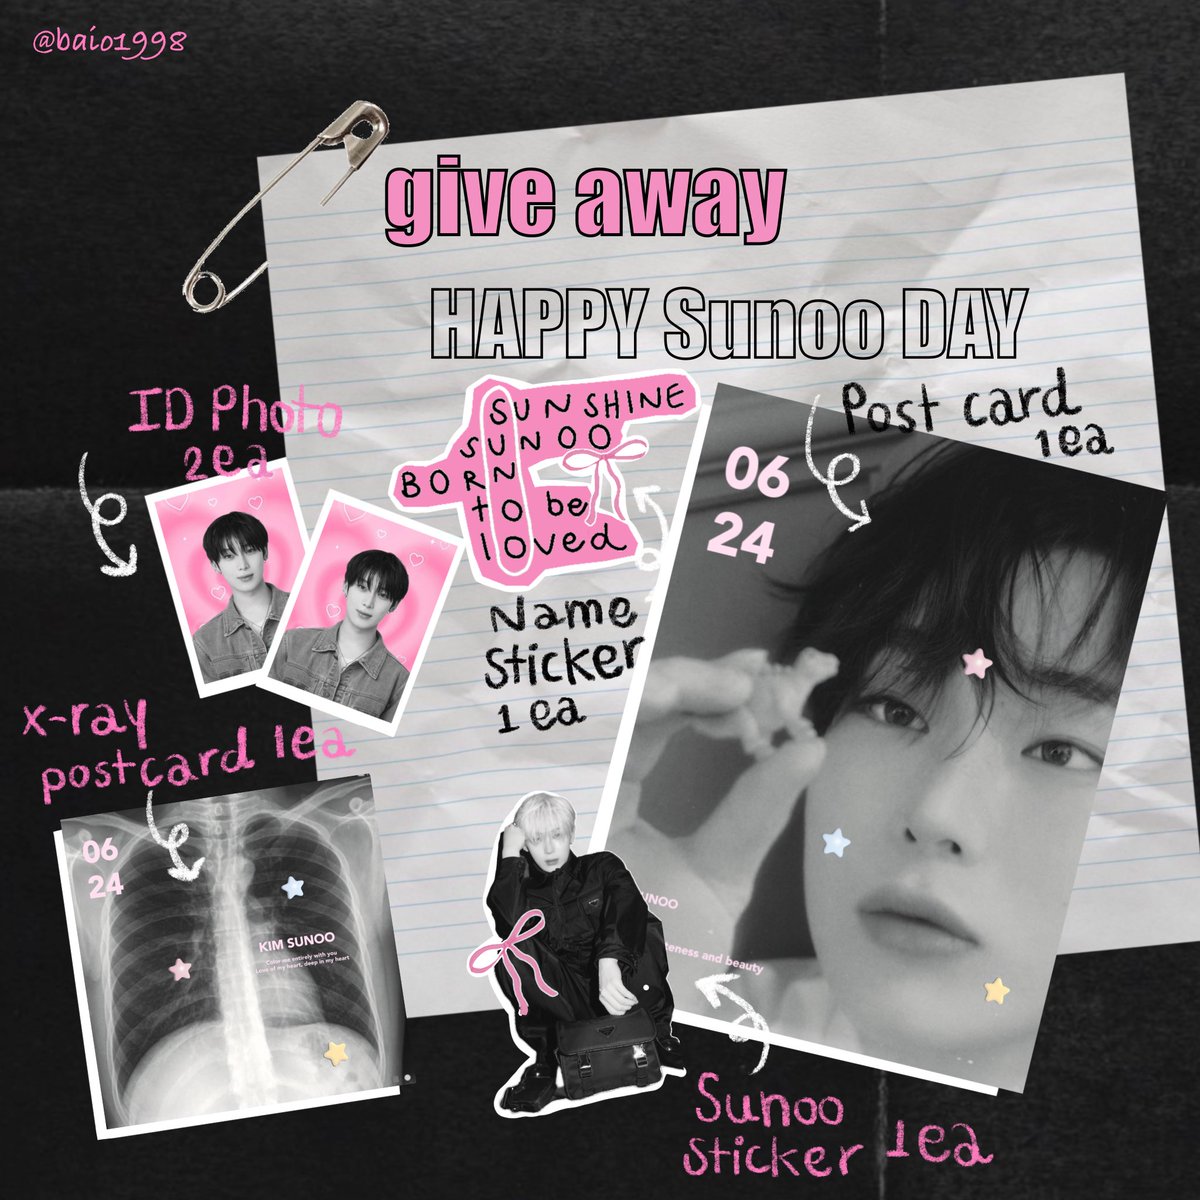 pls kindly rt •☆  •·. · '`
🎀✨𝐠𝐢𝐯𝐞𝐚𝐰𝐚𝐲 𝐒𝐮𝐧𝐨𝐨 𝐝𝐚𝐲 ✨🎀
      
𐙚 only 10 set/day ✿.｡

♡ DATE : 22-23 June 2024
♡ Location & Time : TBA

•: ★𝒮𝓅𝑒𝒸𝒾𝒶𝓁 𝒻𝑜𝓇 𝒮𝒰𝒩𝒮𝒰𝒩 𝓈𝒽𝒾𝓅𝓅𝑒𝓇 ★•: *

 #HappySunooDay #Happy_Sunoo_Day